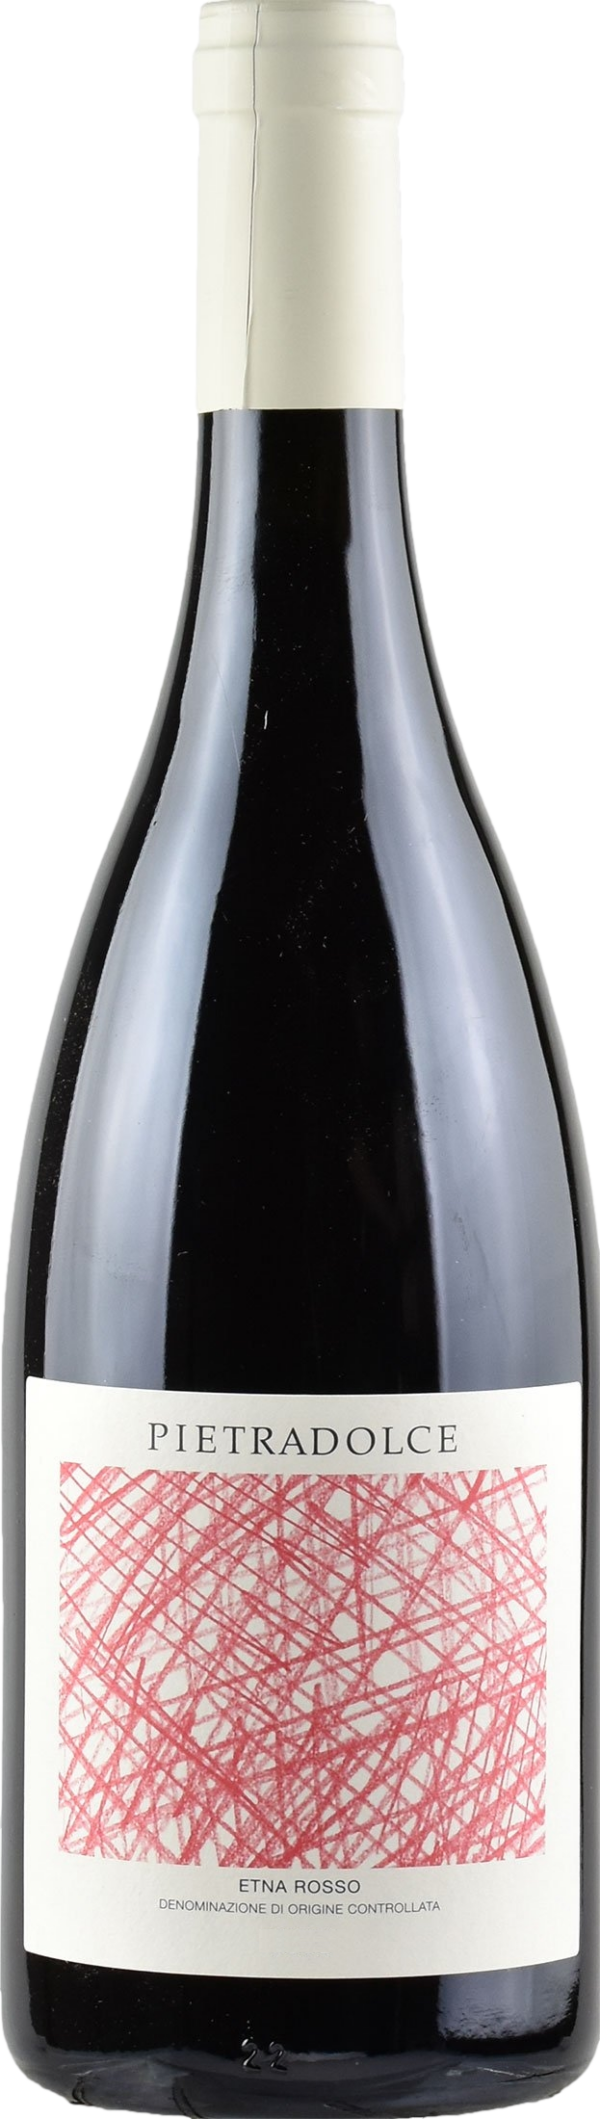 Product image of Pietradolce Etna Rosso 2022 from 8wines